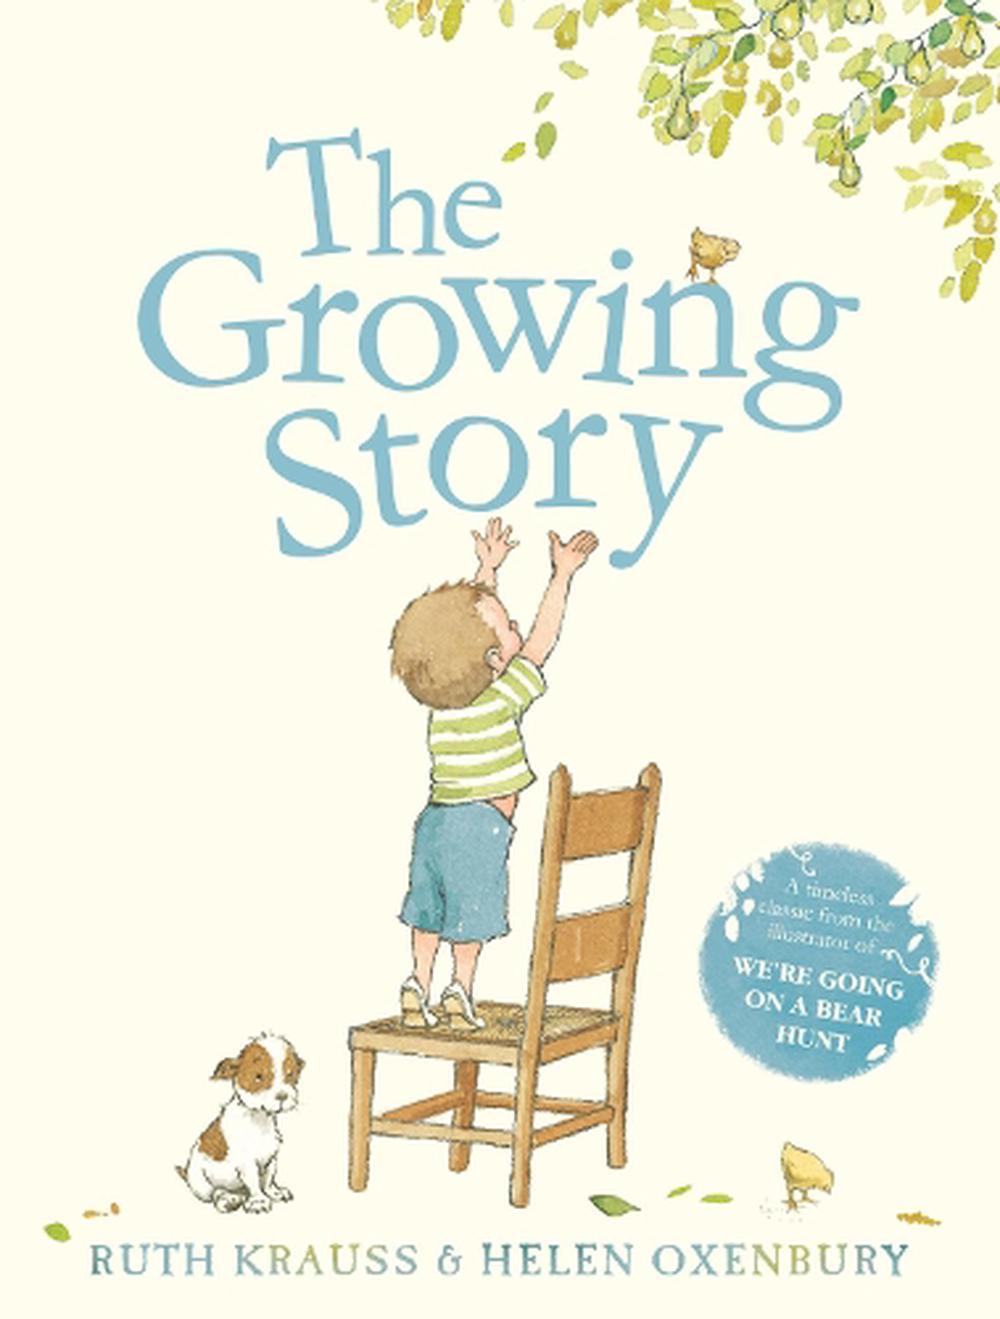 Growing stories. Little imperfections story of growing up different book. Grow stories